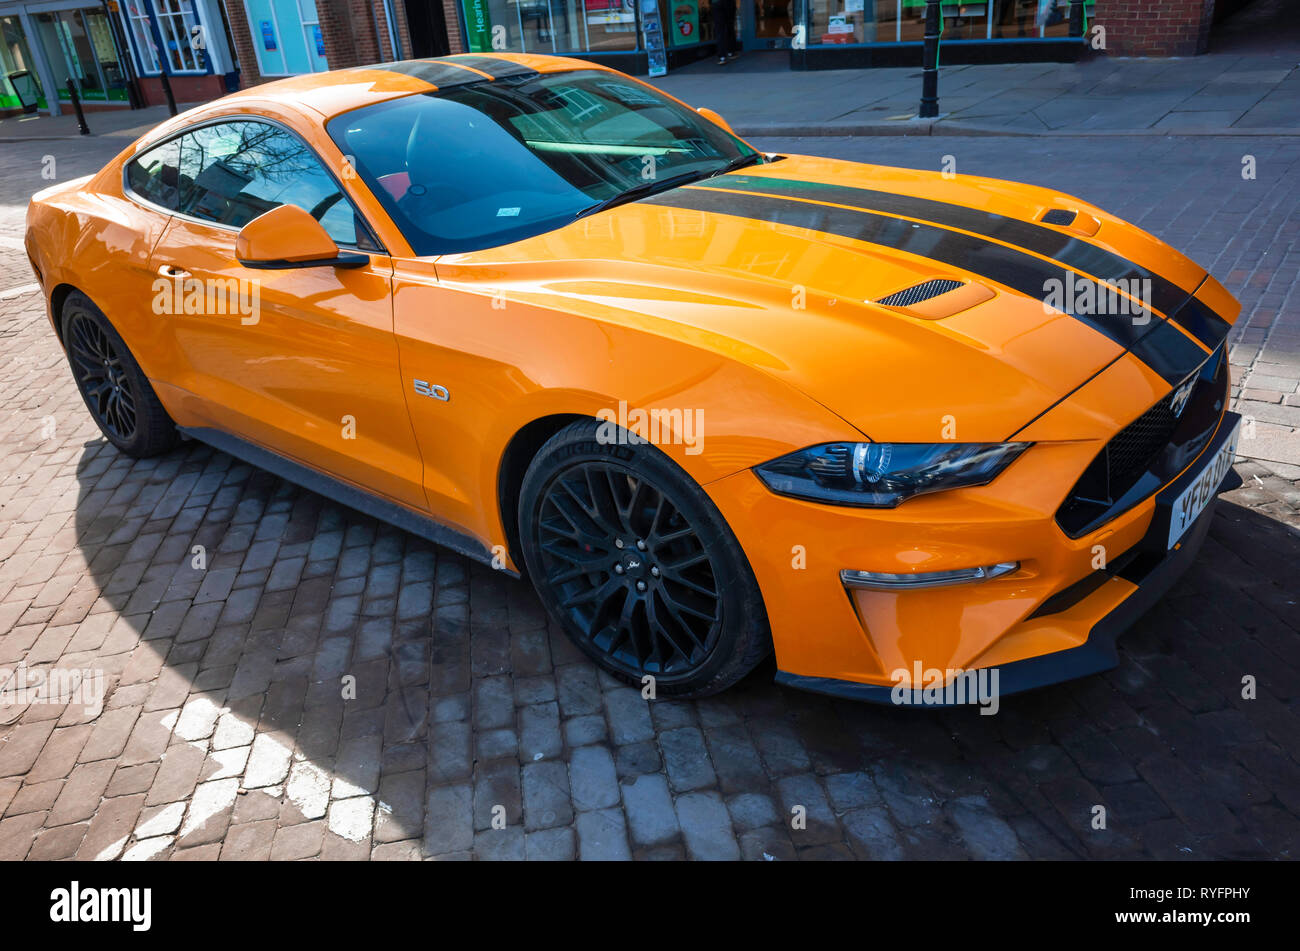 A 2018 registered orange and black Ford Mustang 5.0 sports  car in North Yorkshire England UK Stock Photo